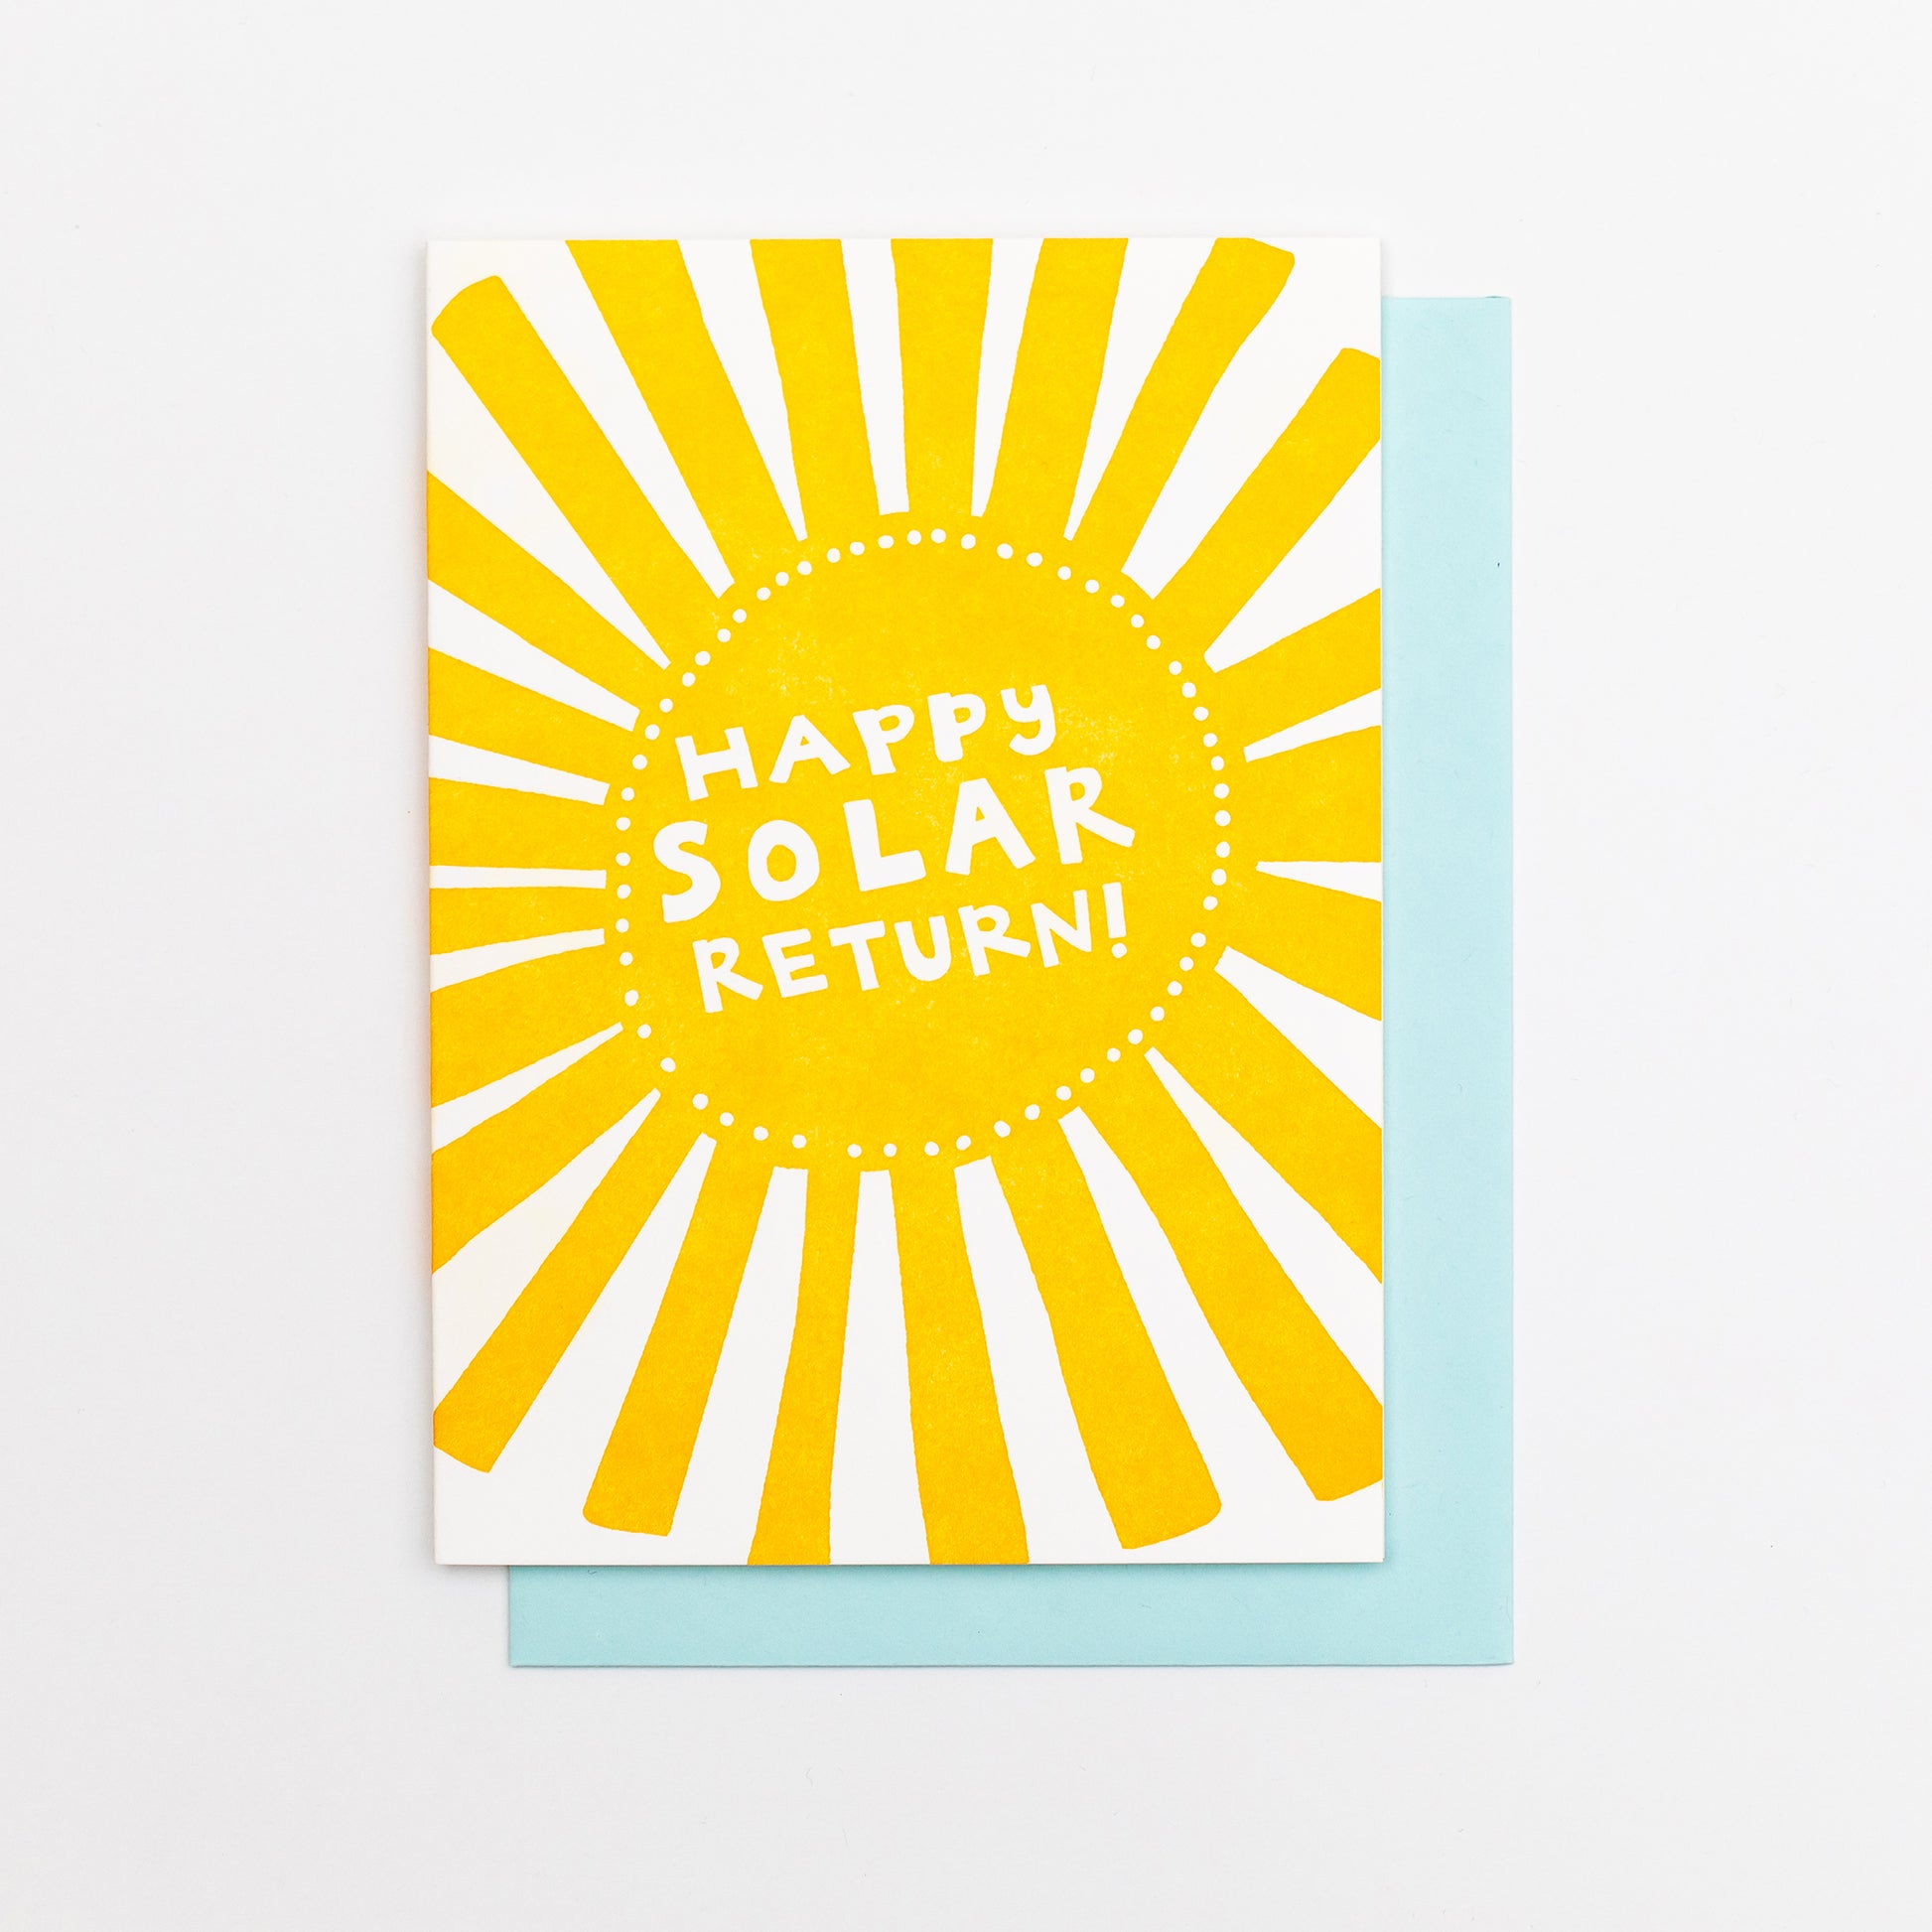 Letterpress greeting card featuring a hand-drawn Sun printed in a vibrant orange-gold ink. "Happy Solar return!" is written in the center of the sun in a whimsical hand-drawn text, in a knockout white. The card is white, blank inside, and is paired with a light sky blue envelope.